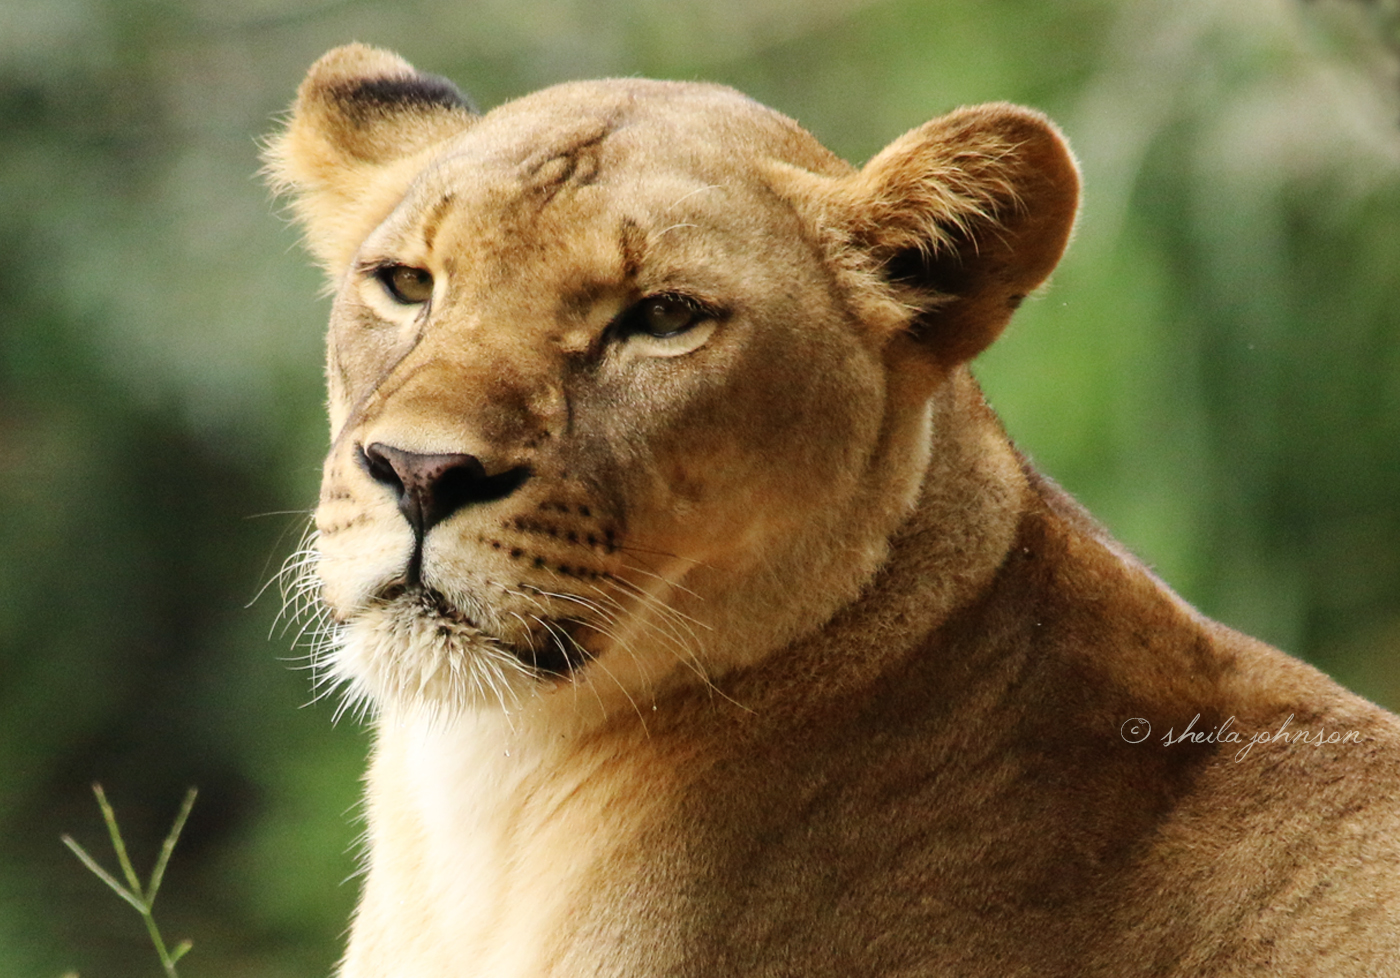 This is one of the lionesses of Zoo Miami. I've always known that lions live in prides, and during my visit to Zoo Miami, I learned that lions are the only cats to live in groups.